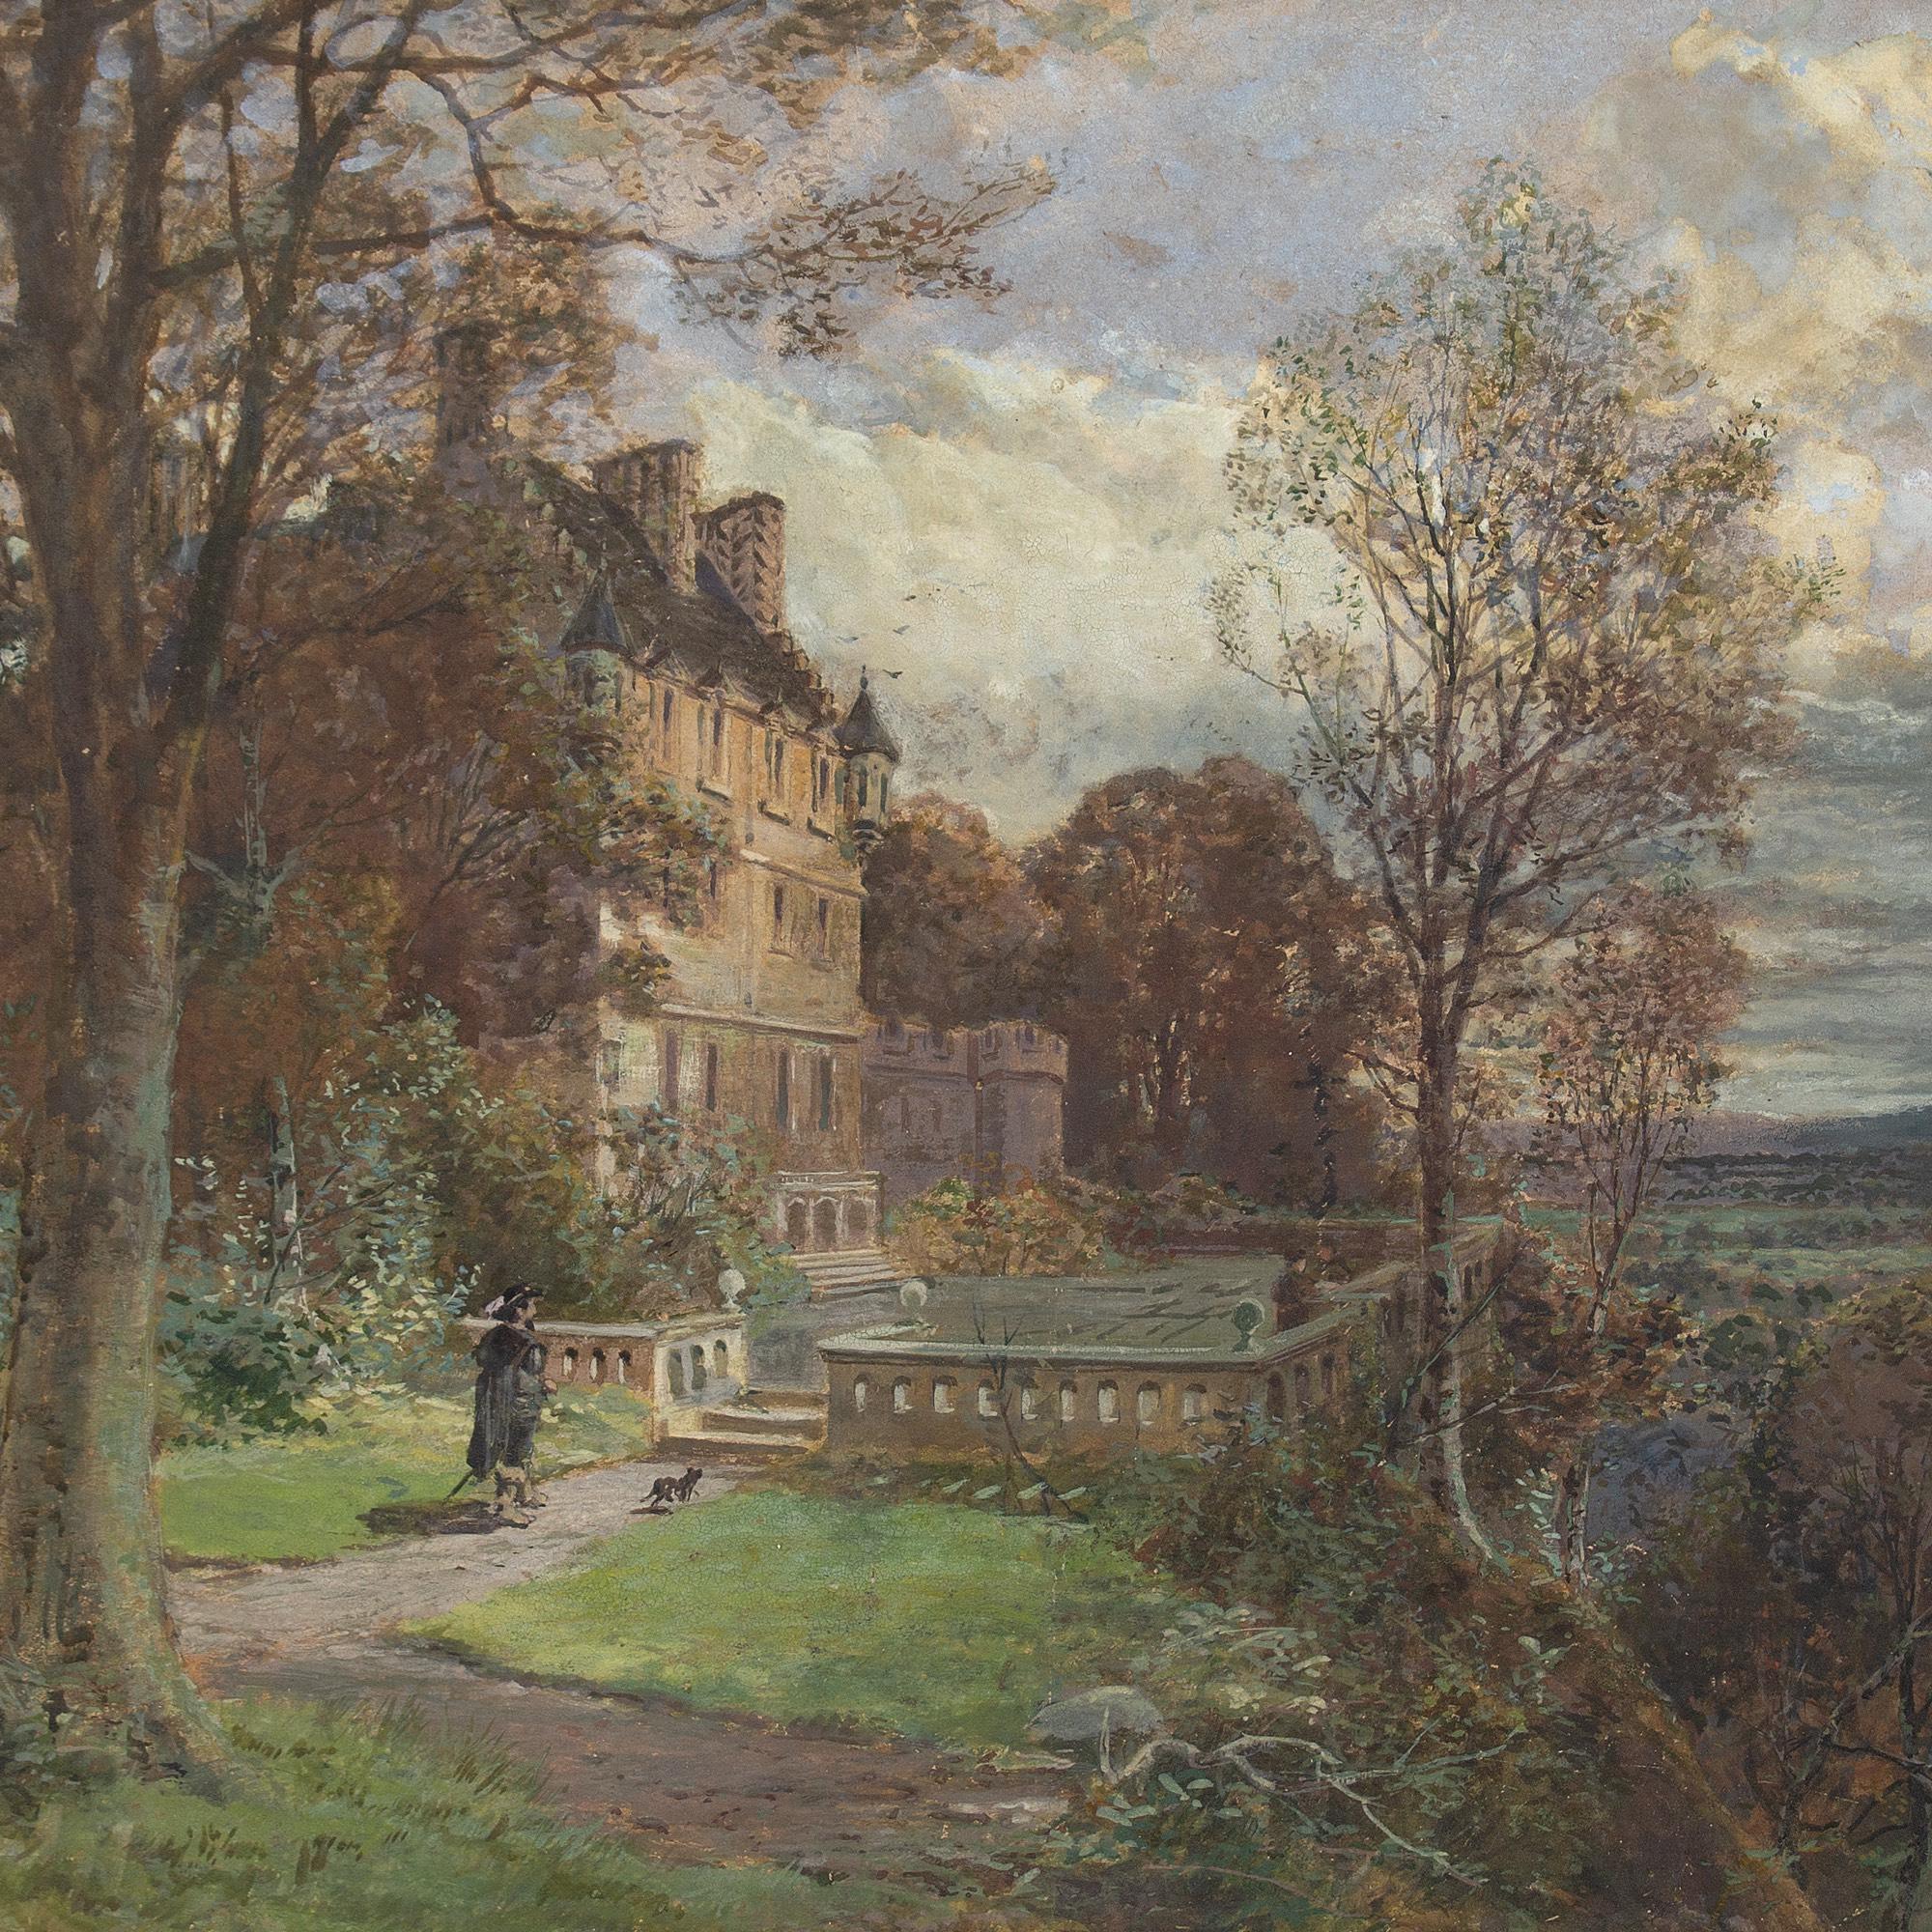 John Smart RSA RSW, The Grounds Of A Scottish Baronial Mansion, Watercolour For Sale 4